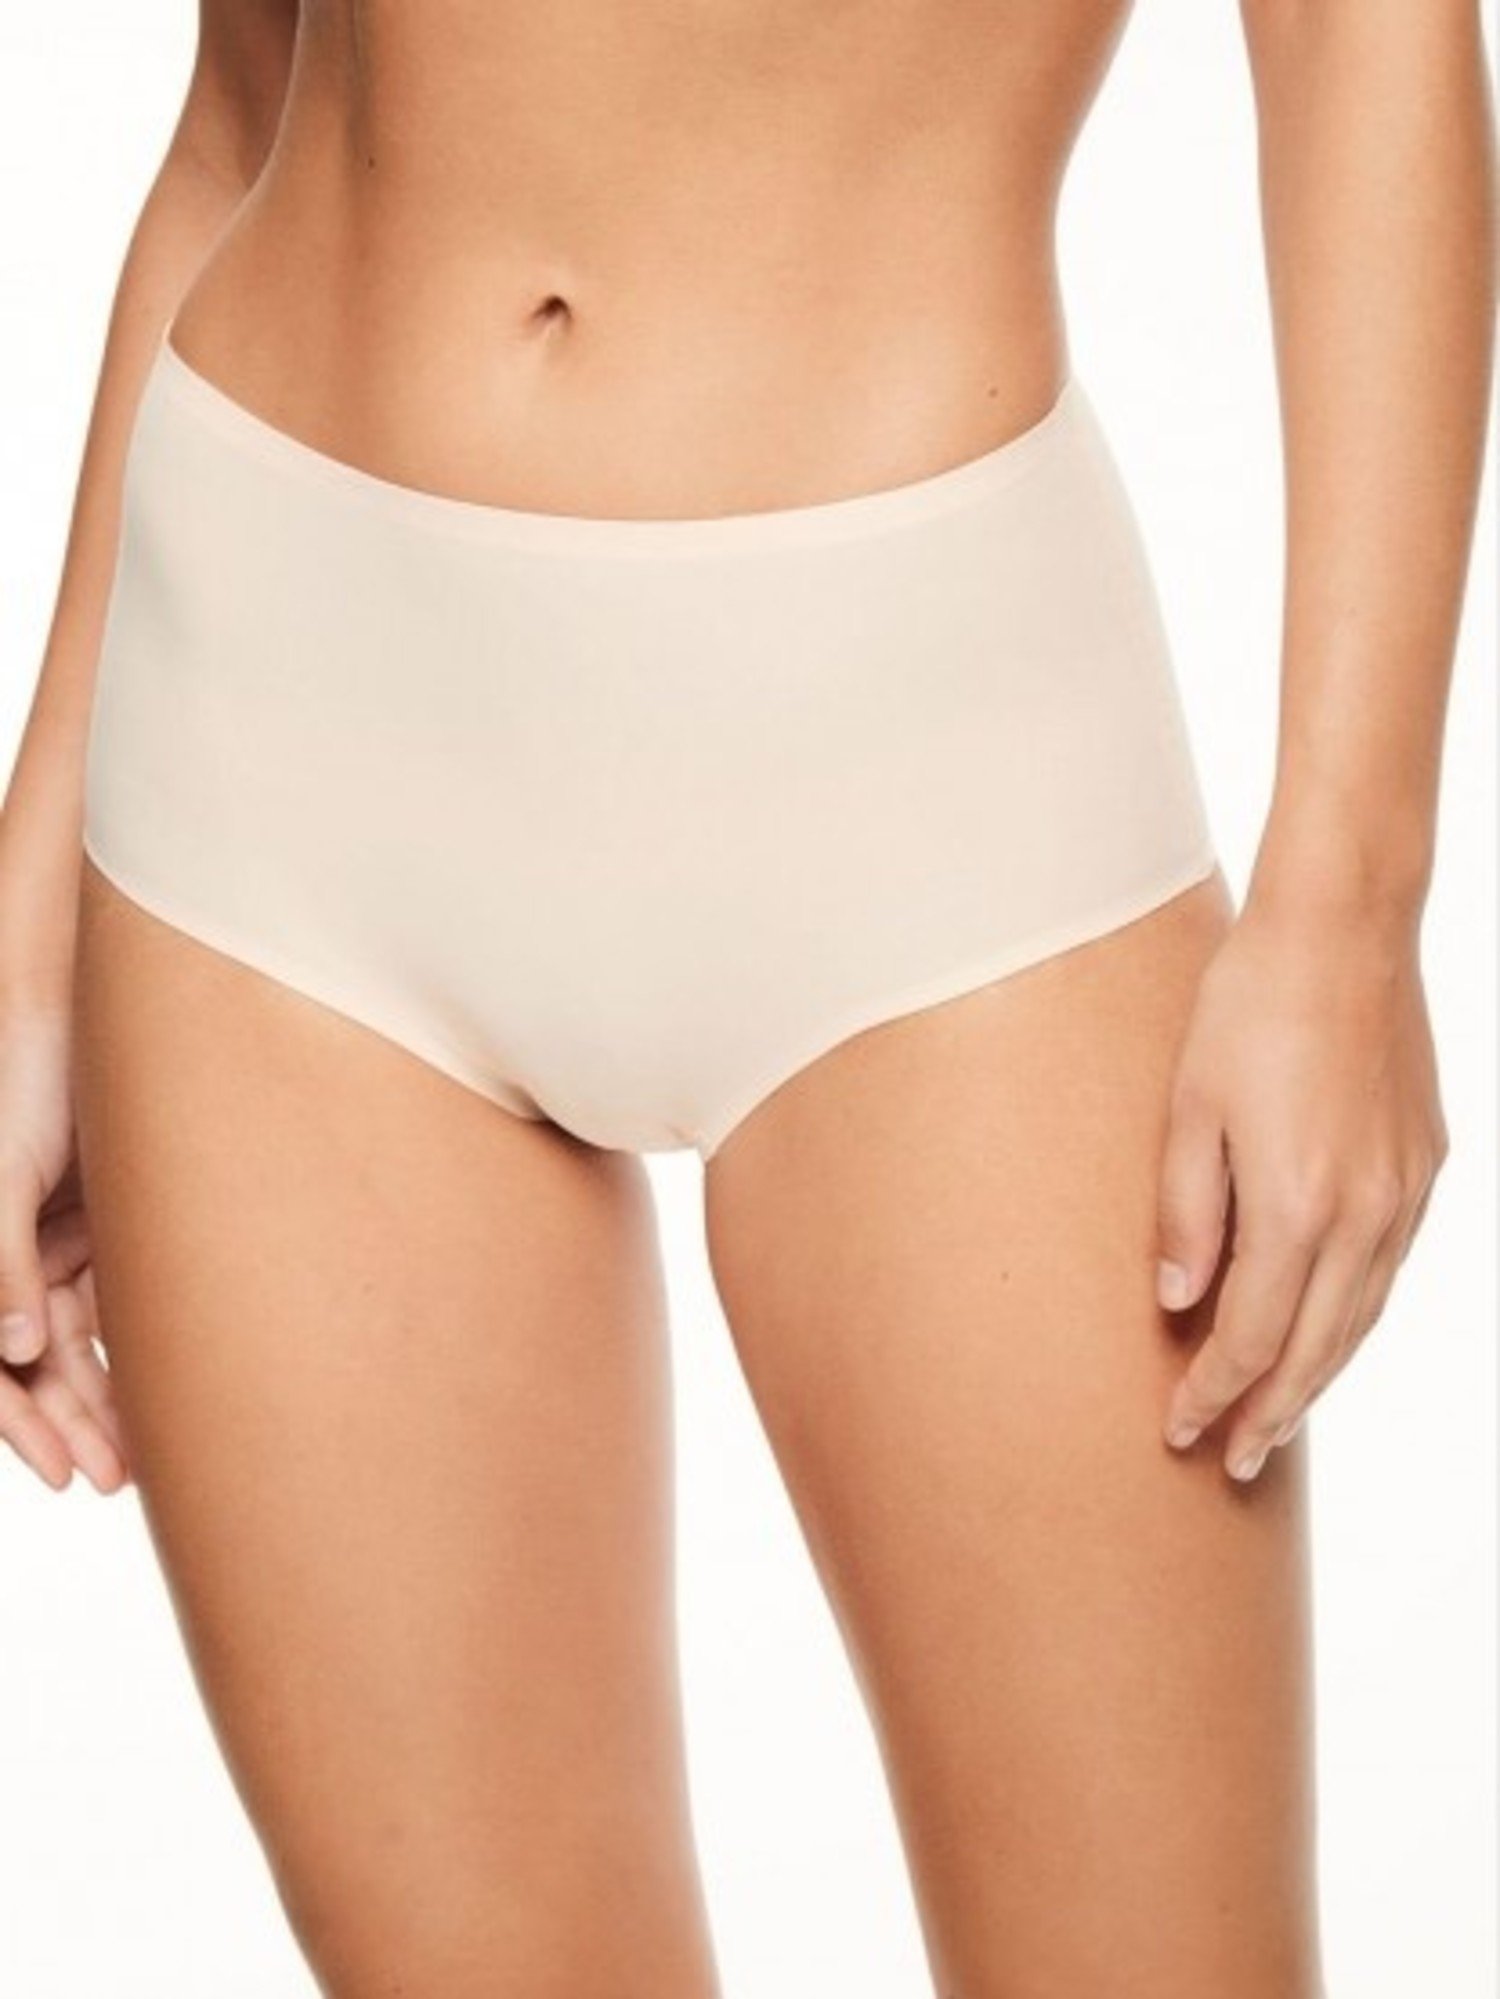 Chantelle Panties - SoftStretch Seamless Full Brief in One Size 2647-035 -  Ivory